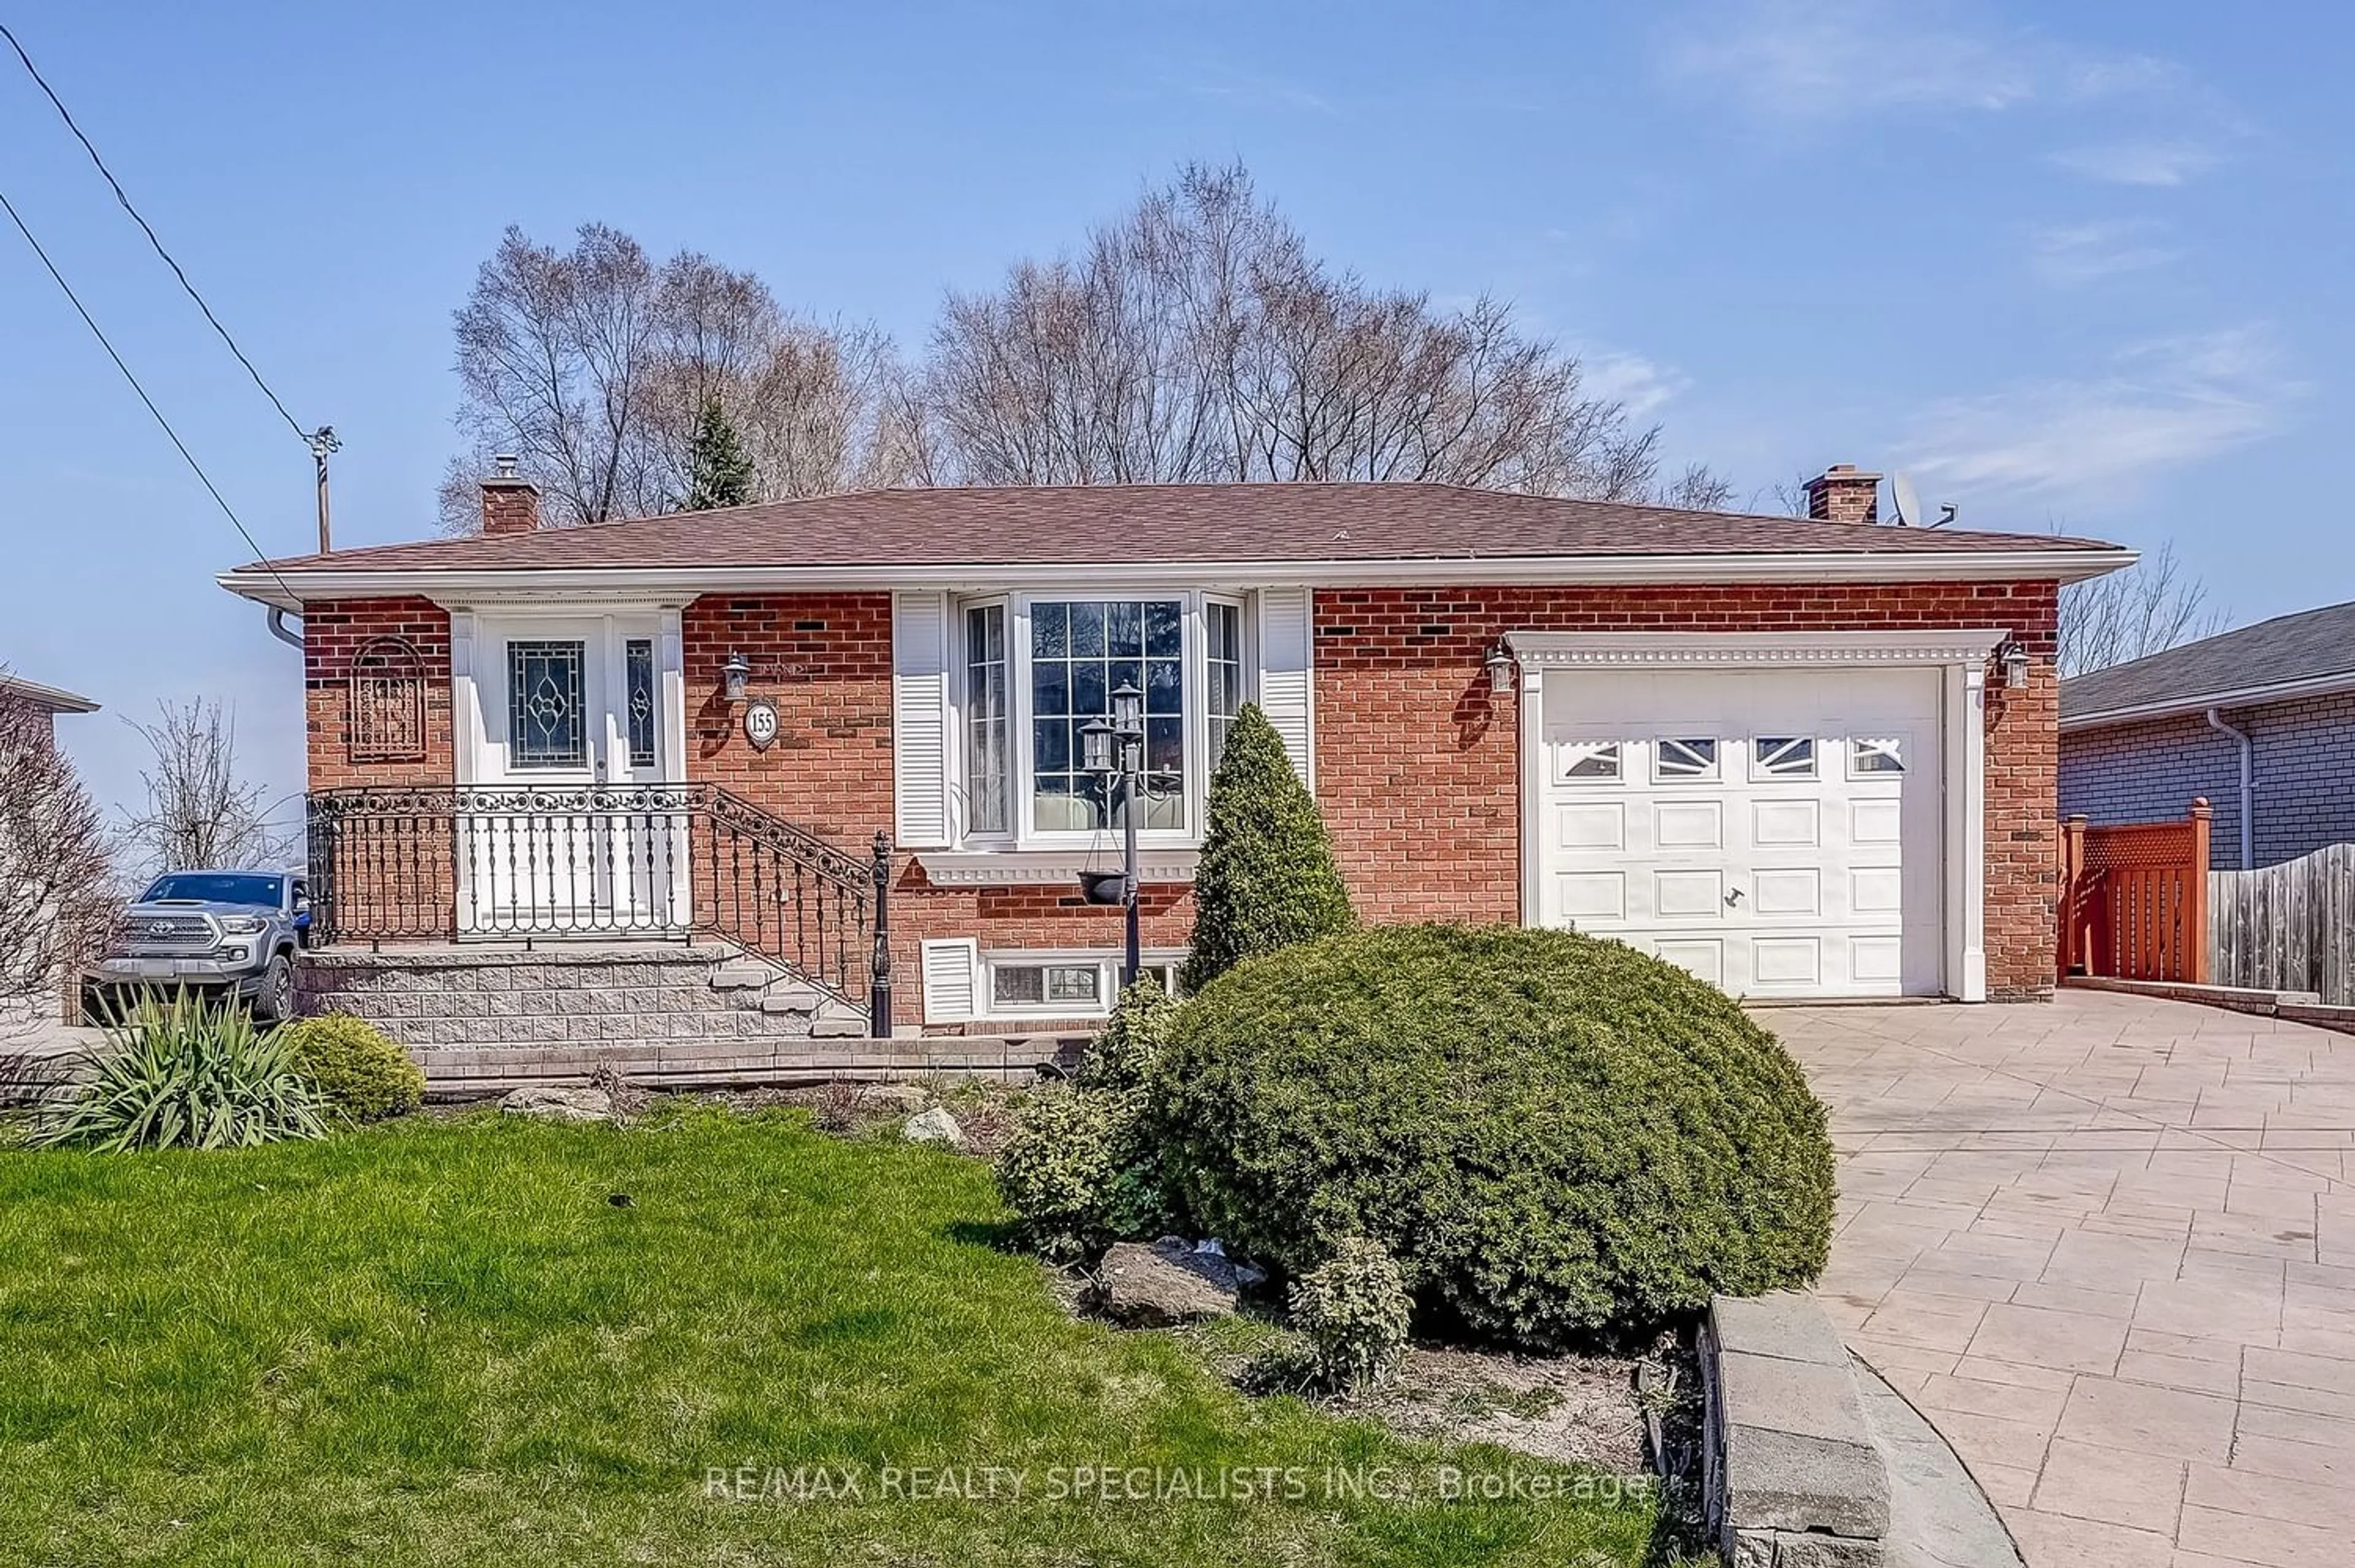 Home with brick exterior material for 155 Collings Ave, Bradford West Gwillimbury Ontario L3Z 1V9